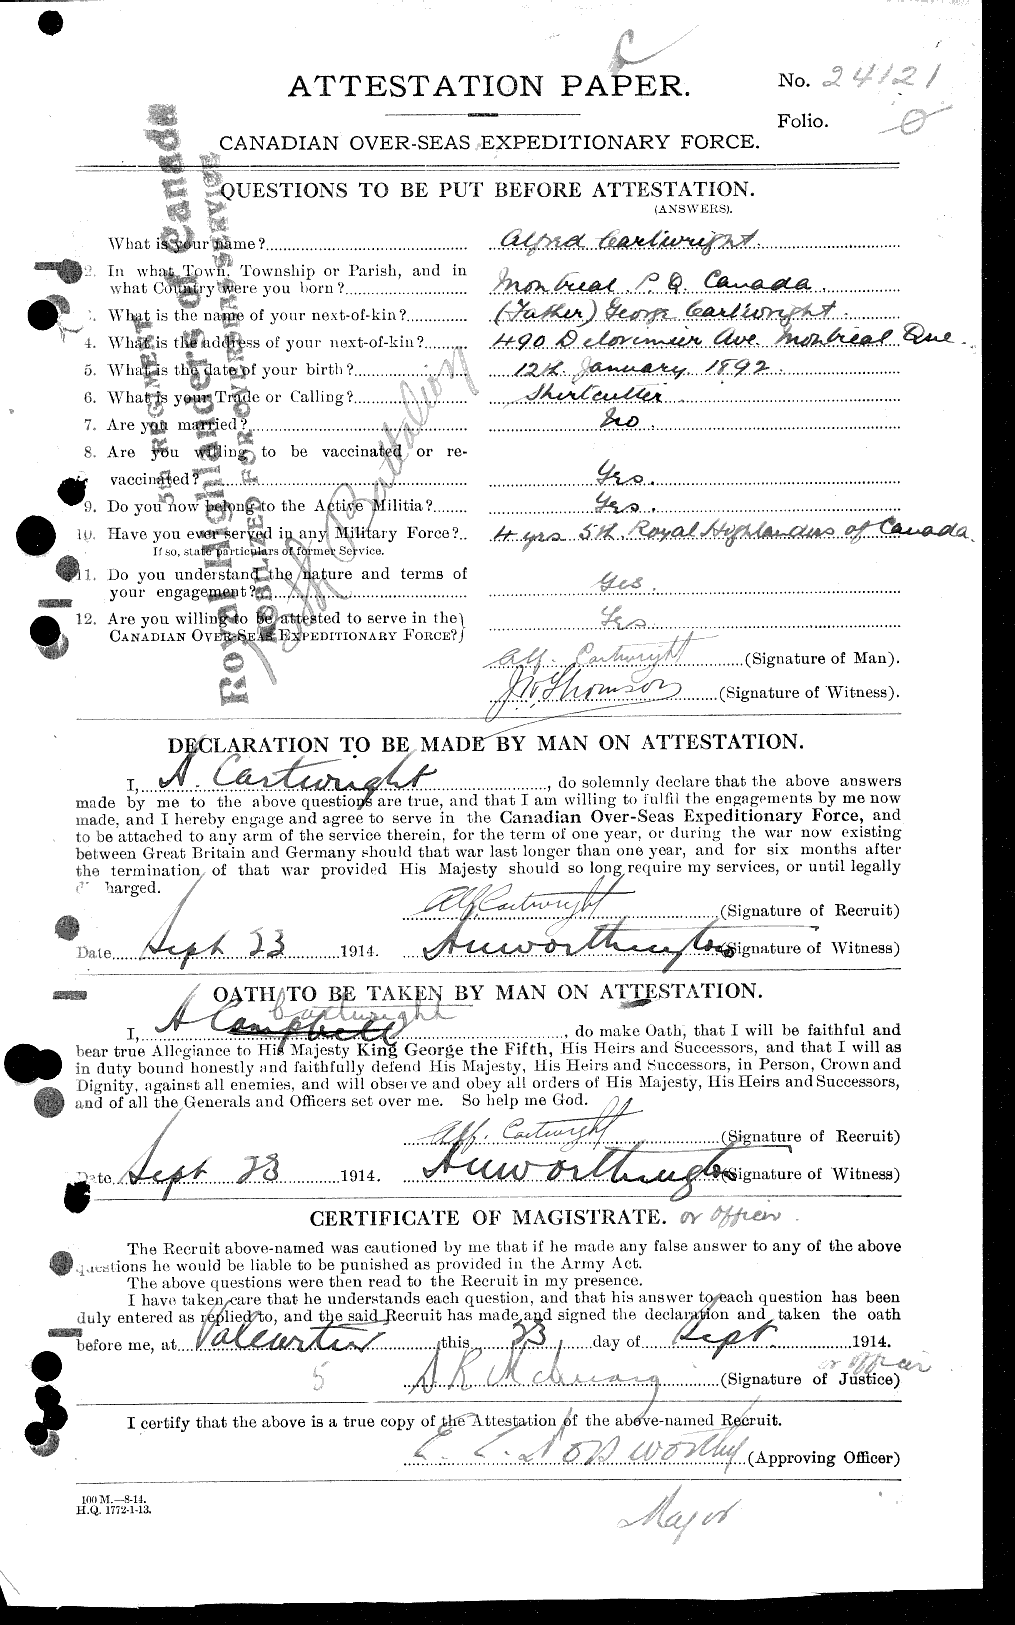 Personnel Records of the First World War - CEF 011545a